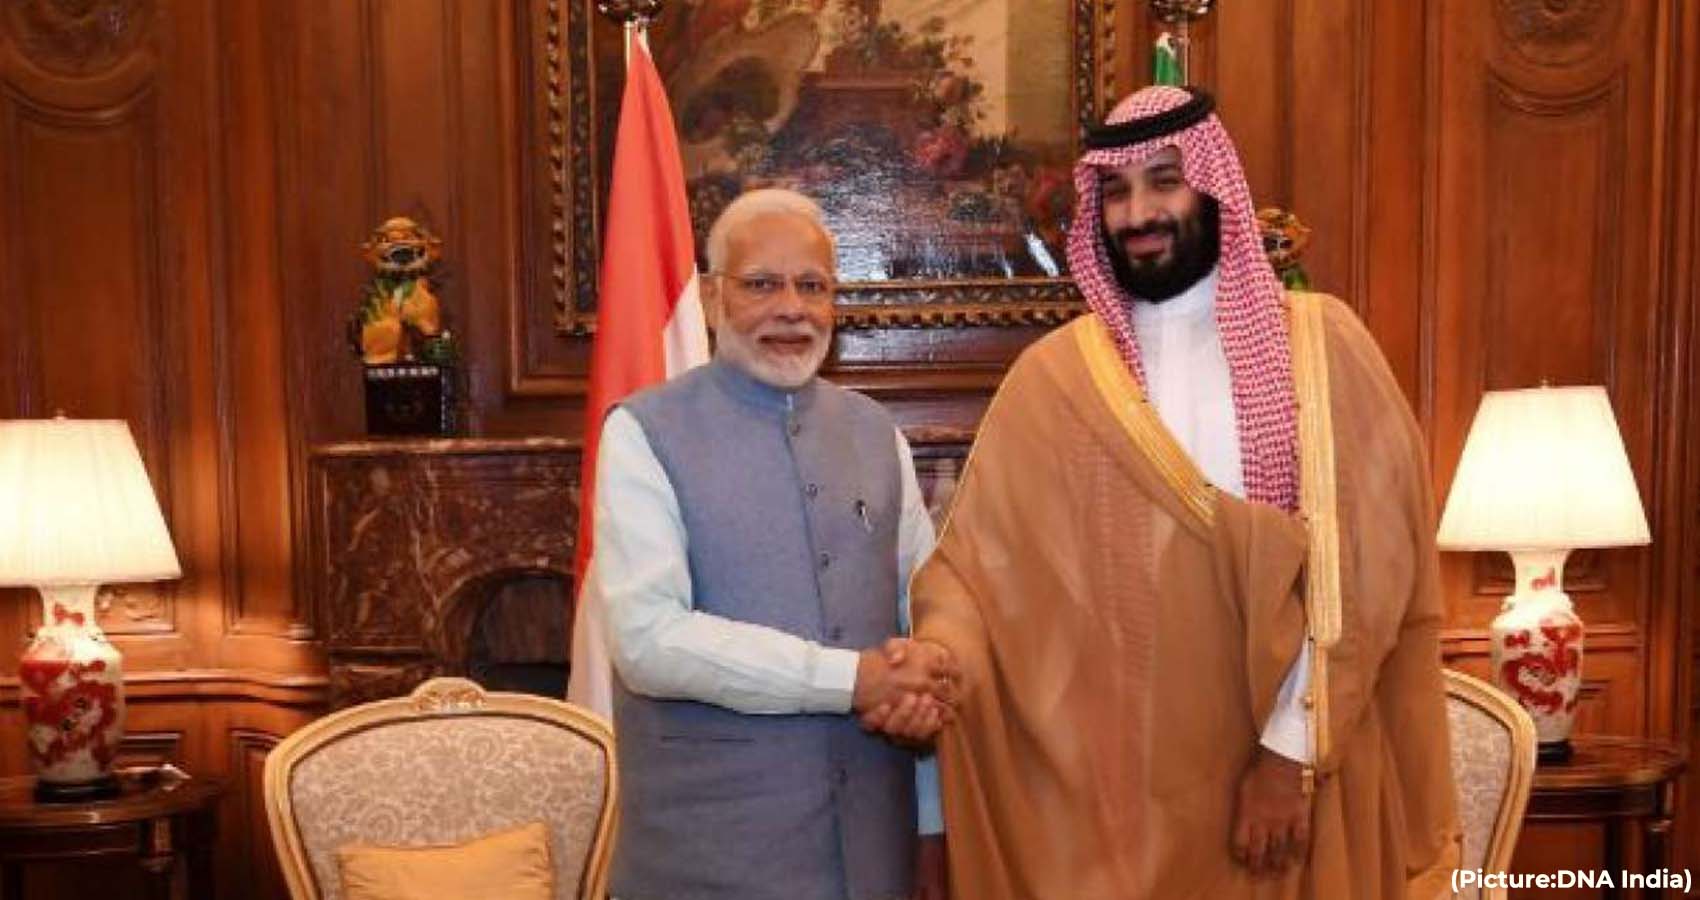 Boycott In Arab World Forces India To Sack BJP Leaders For Blasphemous Comments